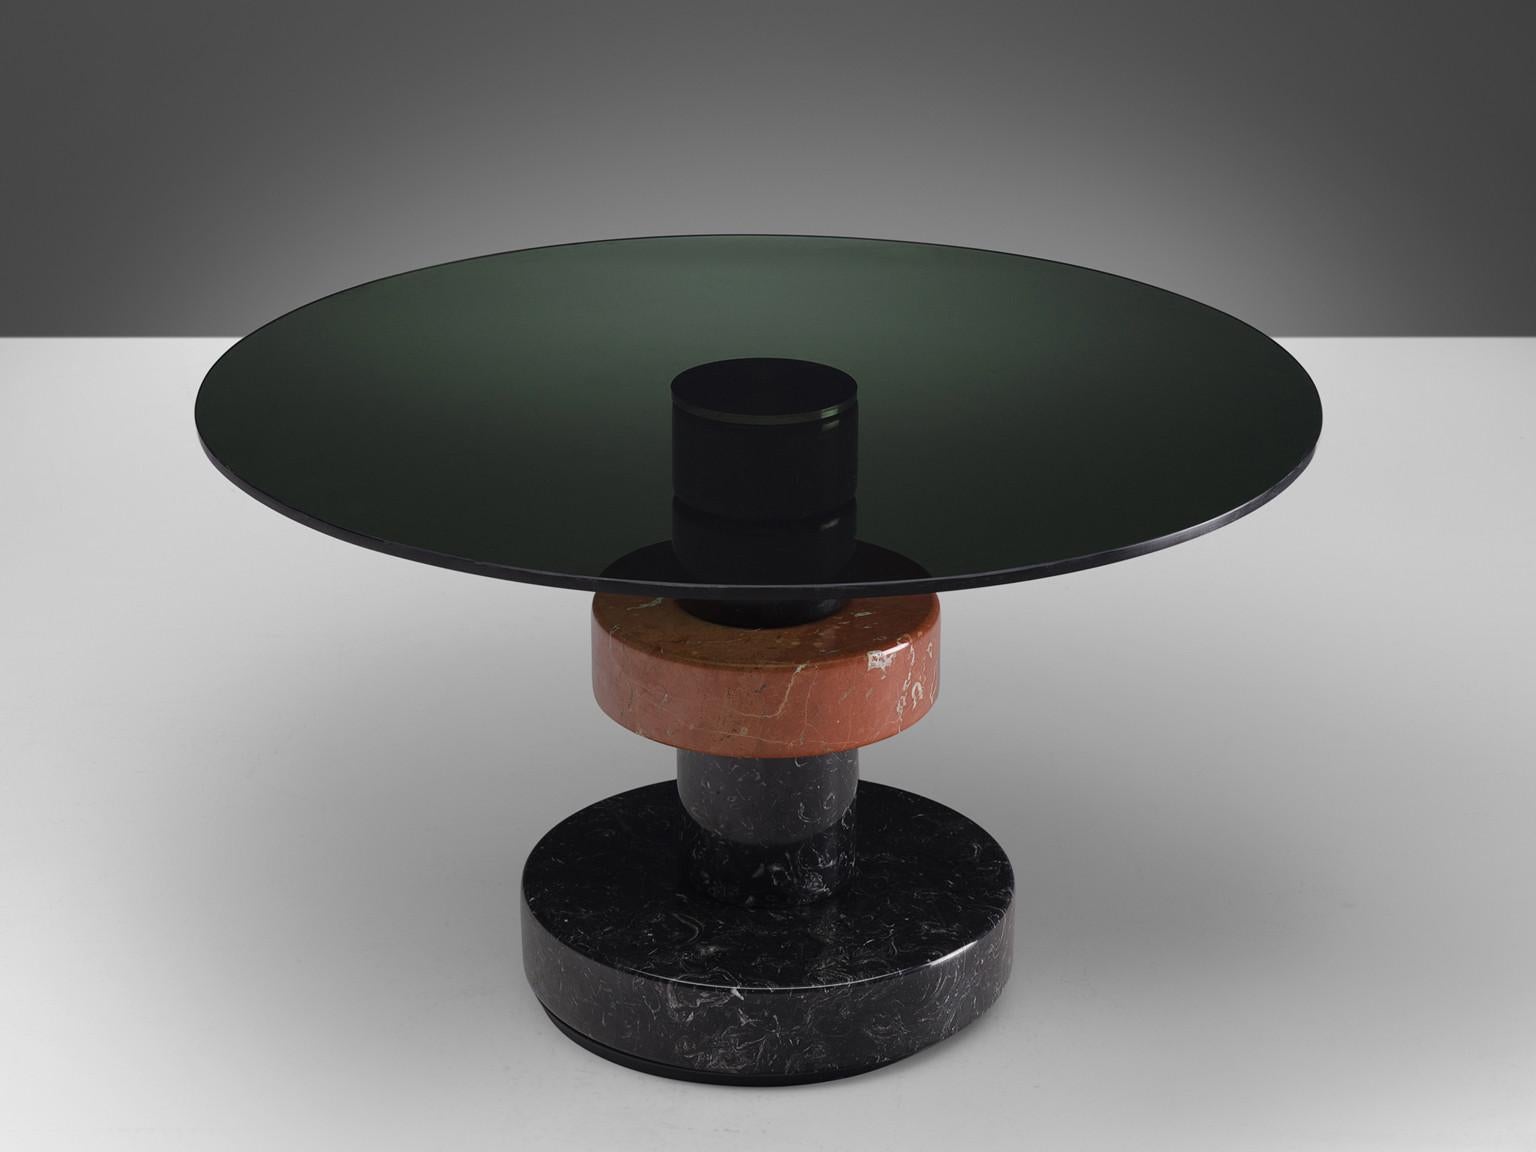 Lodovico Acerbis and Giotto Stoppino for Acerbis International, dining table model 'Menhir', marble, stainless steel, glass, Italy, 1983.

This sculptural dining table with a round top was part of the 